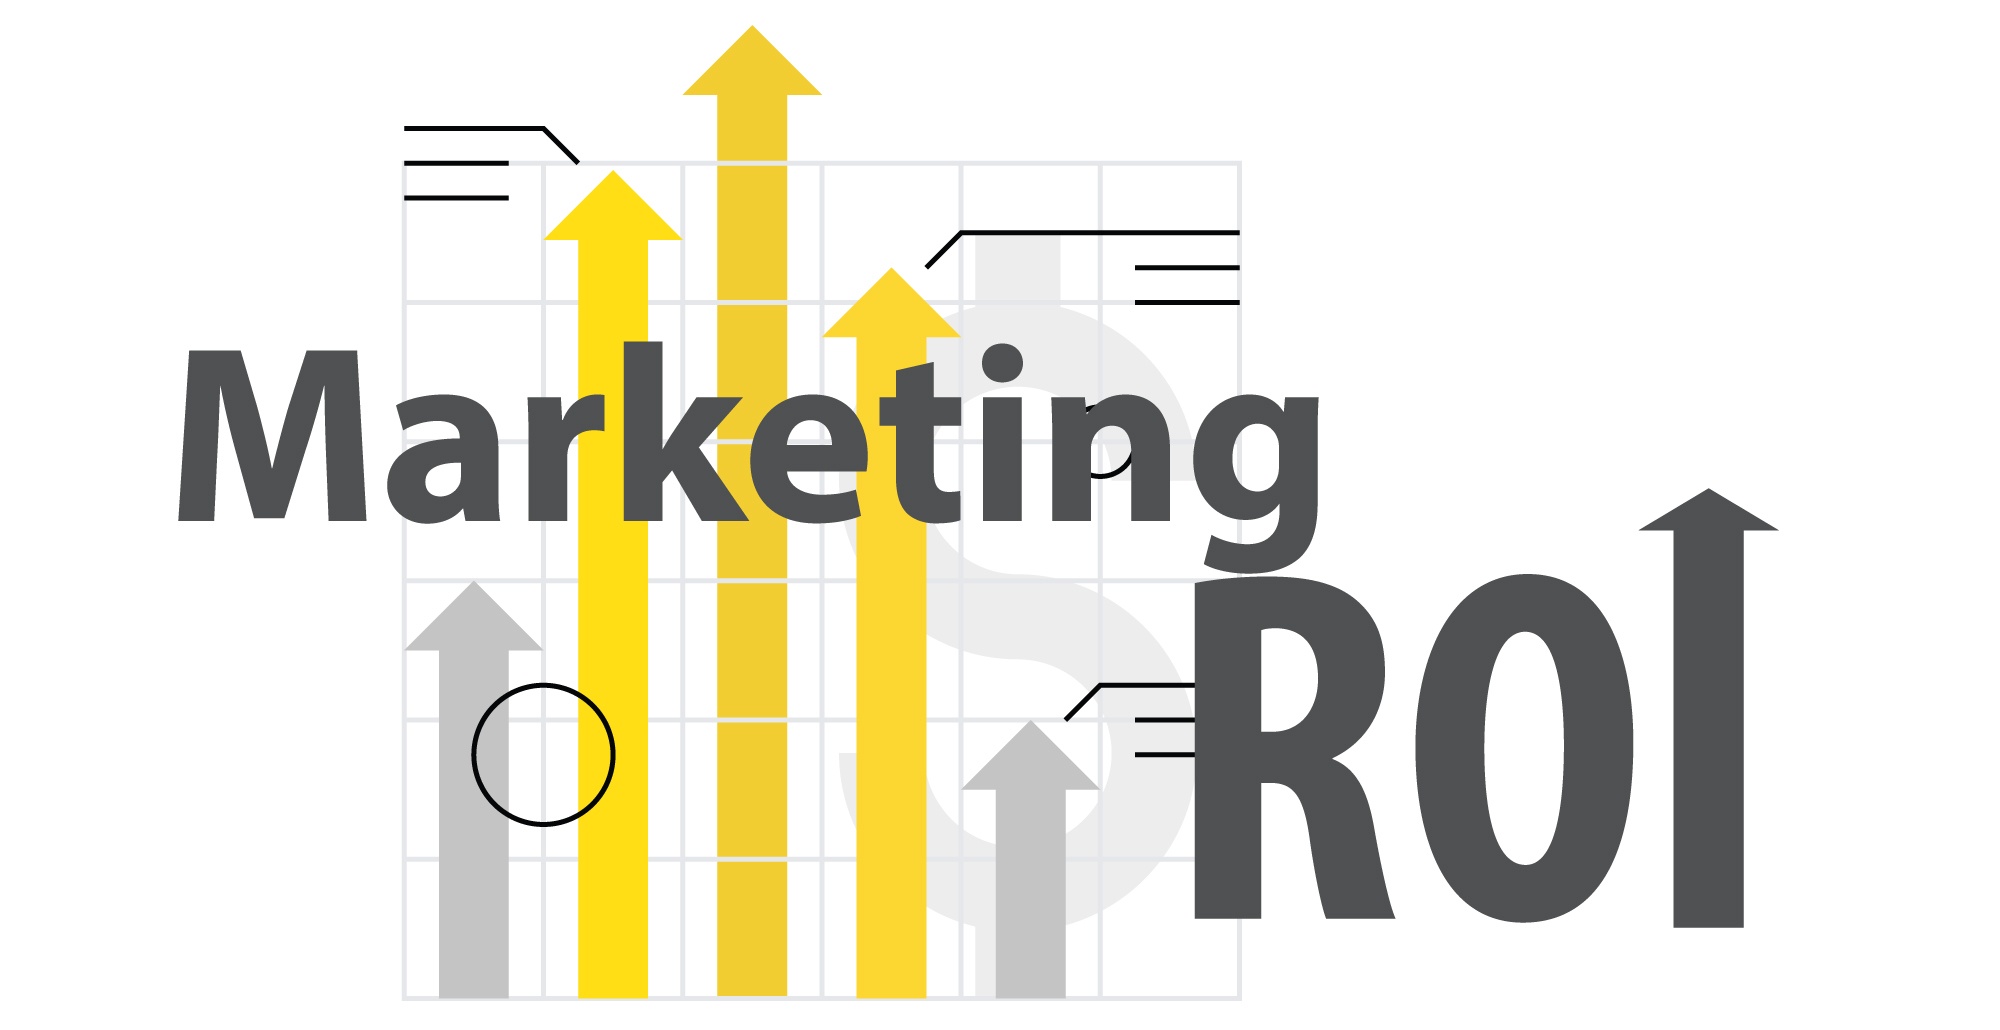 Illustration of marketing ROI with charts and upward arrows